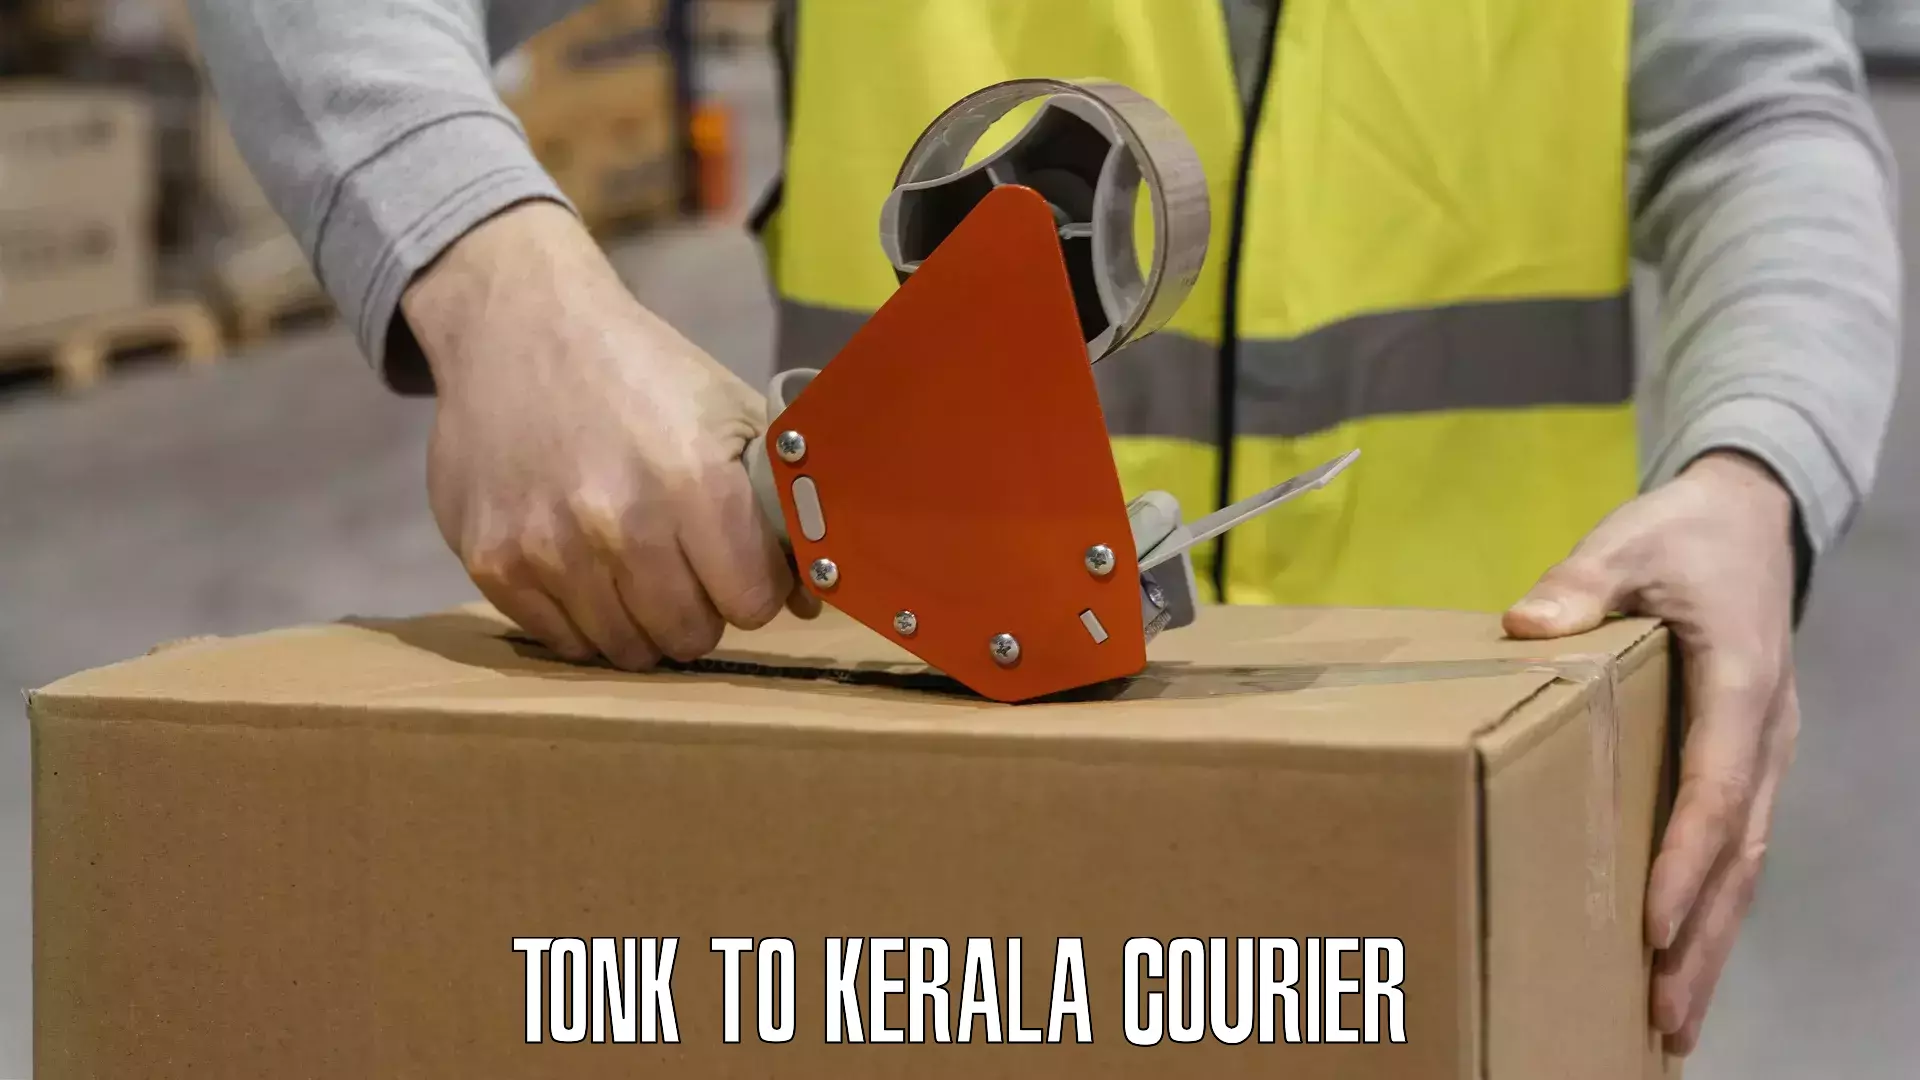 Professional courier services Tonk to Calicut